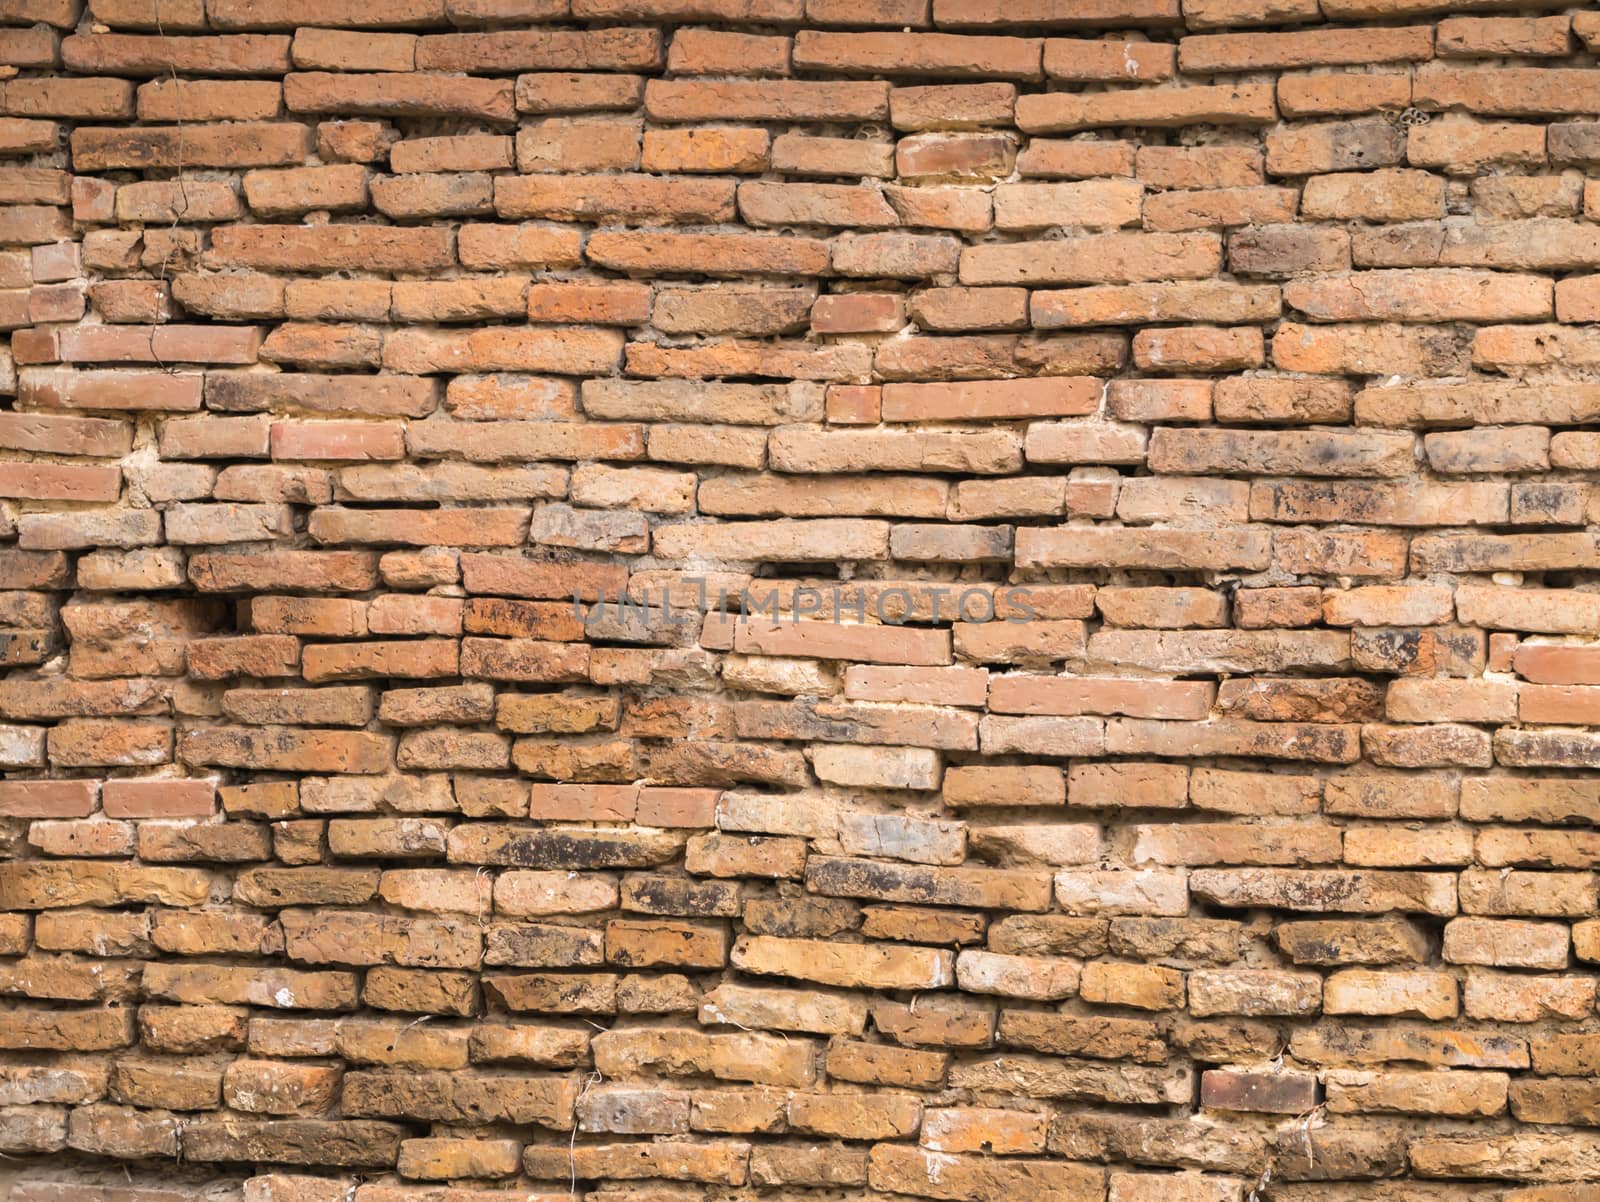 Brick Wall Background by nikky1972